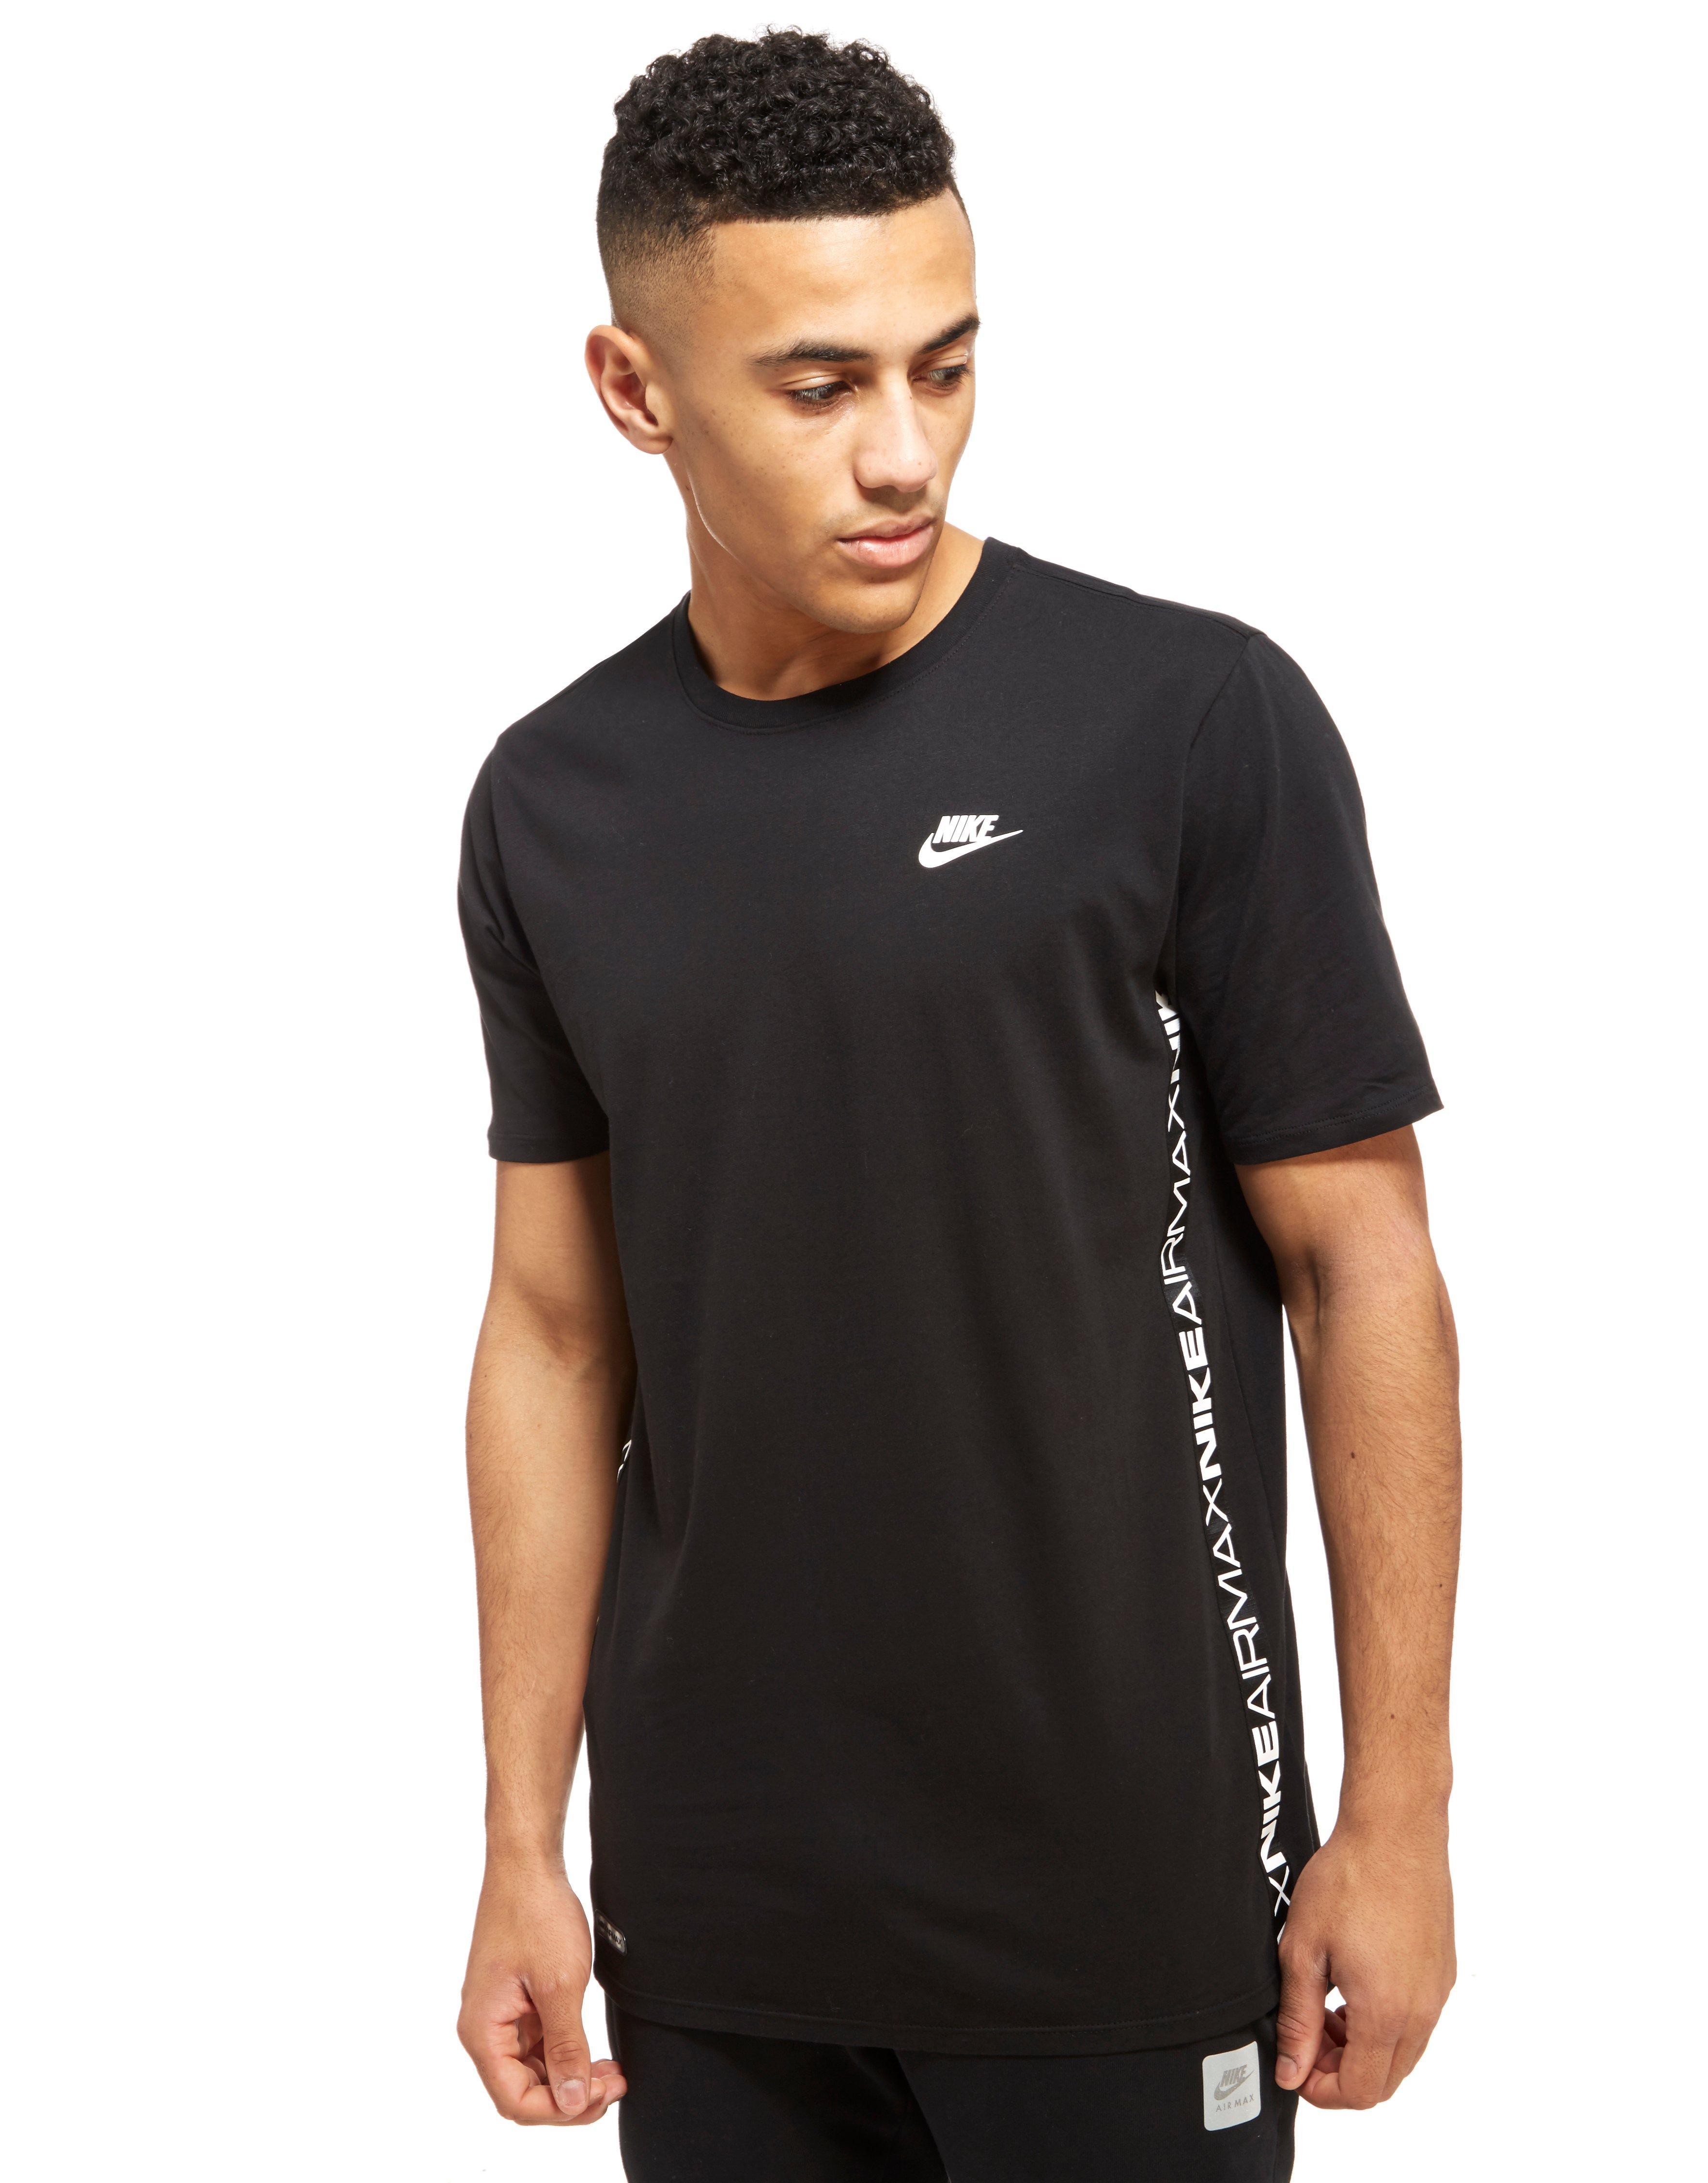 Nike Cotton Air Max Tape T-shirt in Black for Men - Lyst